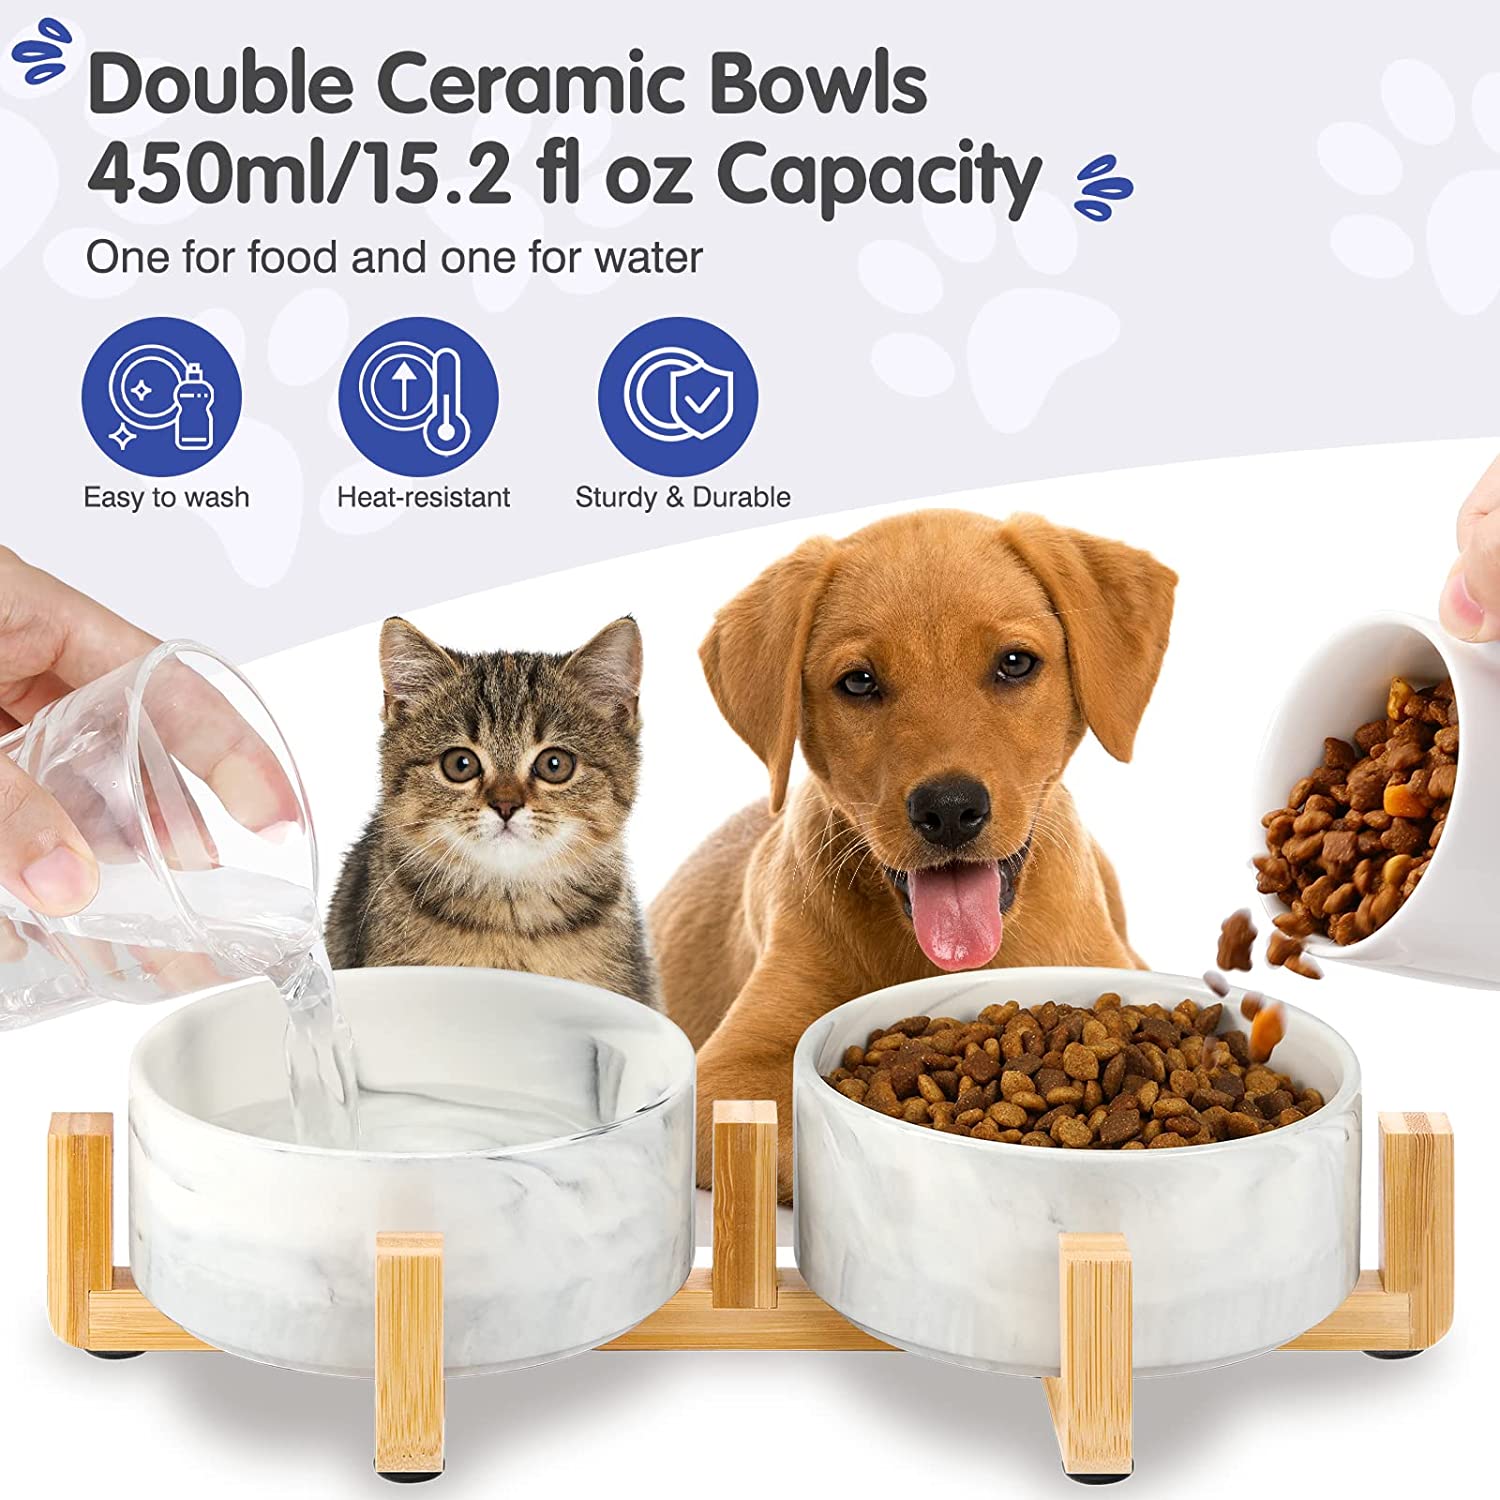 Paw Shaped Pet Bowl  Cat & Dog Related Promotional Items